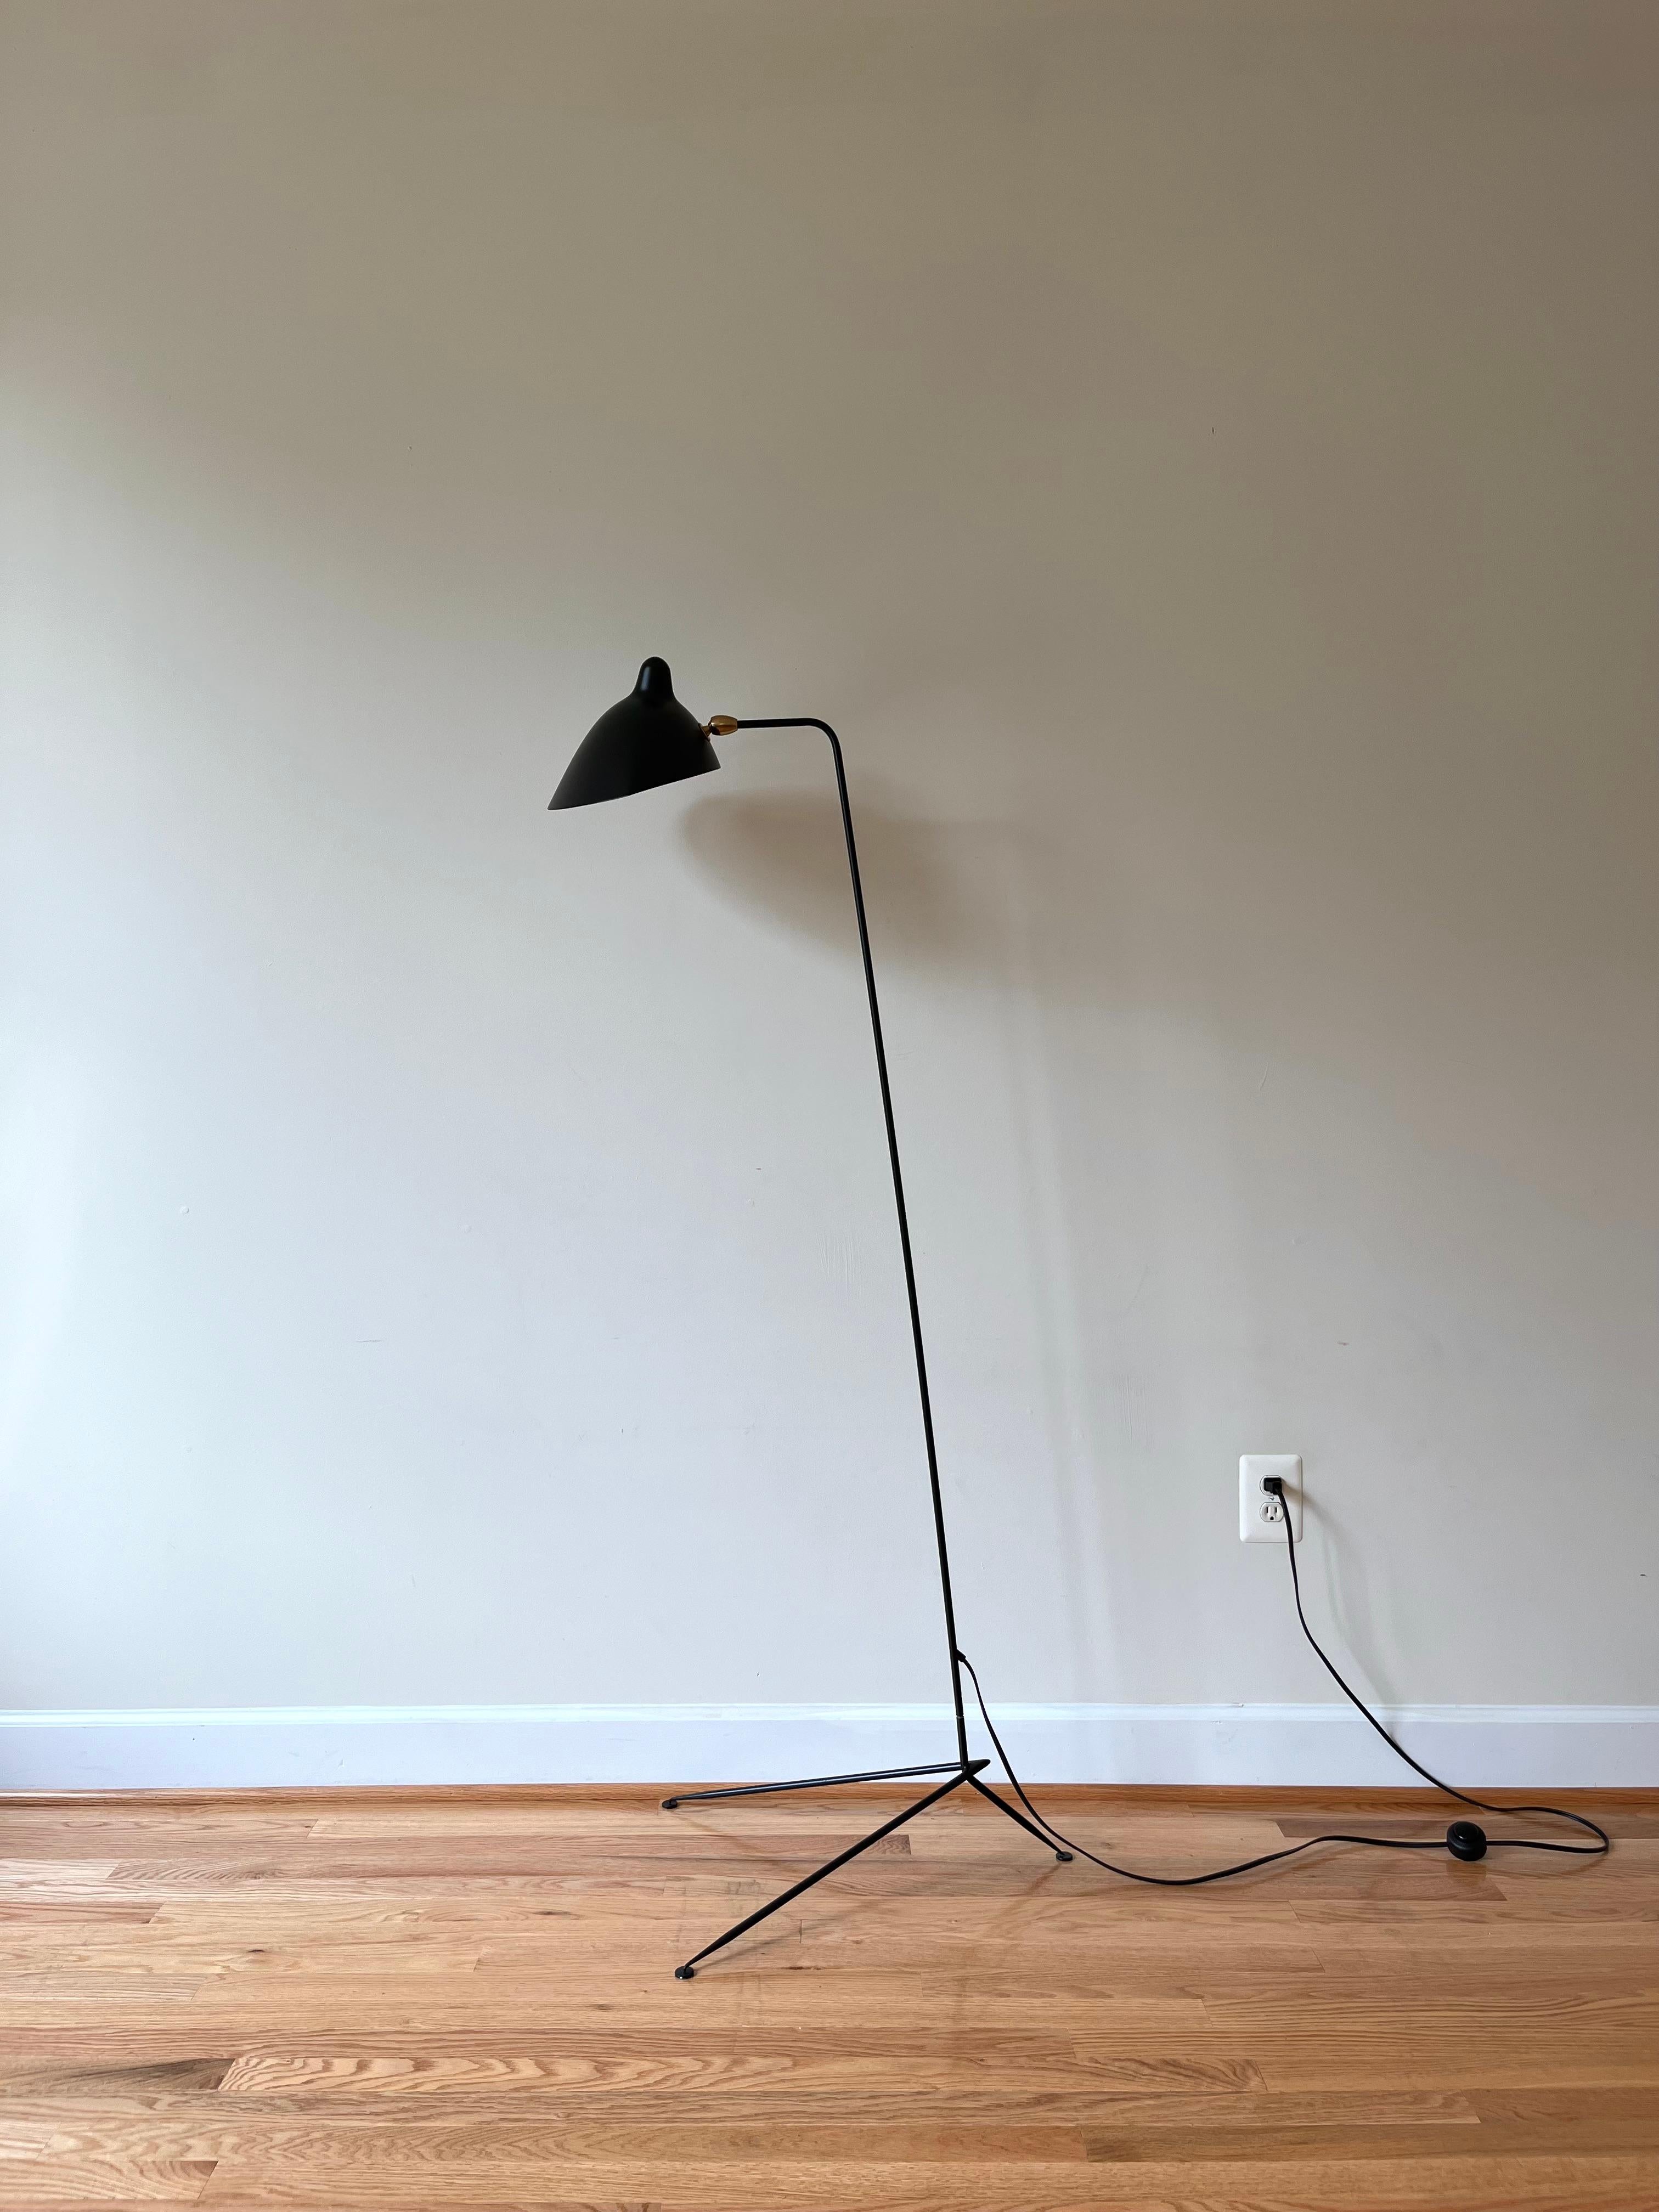 Serge Mouille’s Floor Lamp (1952) has a kinetic, sculptural aesthetic that evokes a sense of movement in space. All the Mouille hallmarks are here: the sensual form of the reflector, the masterful metalwork, the refined lines of the steel tubing,